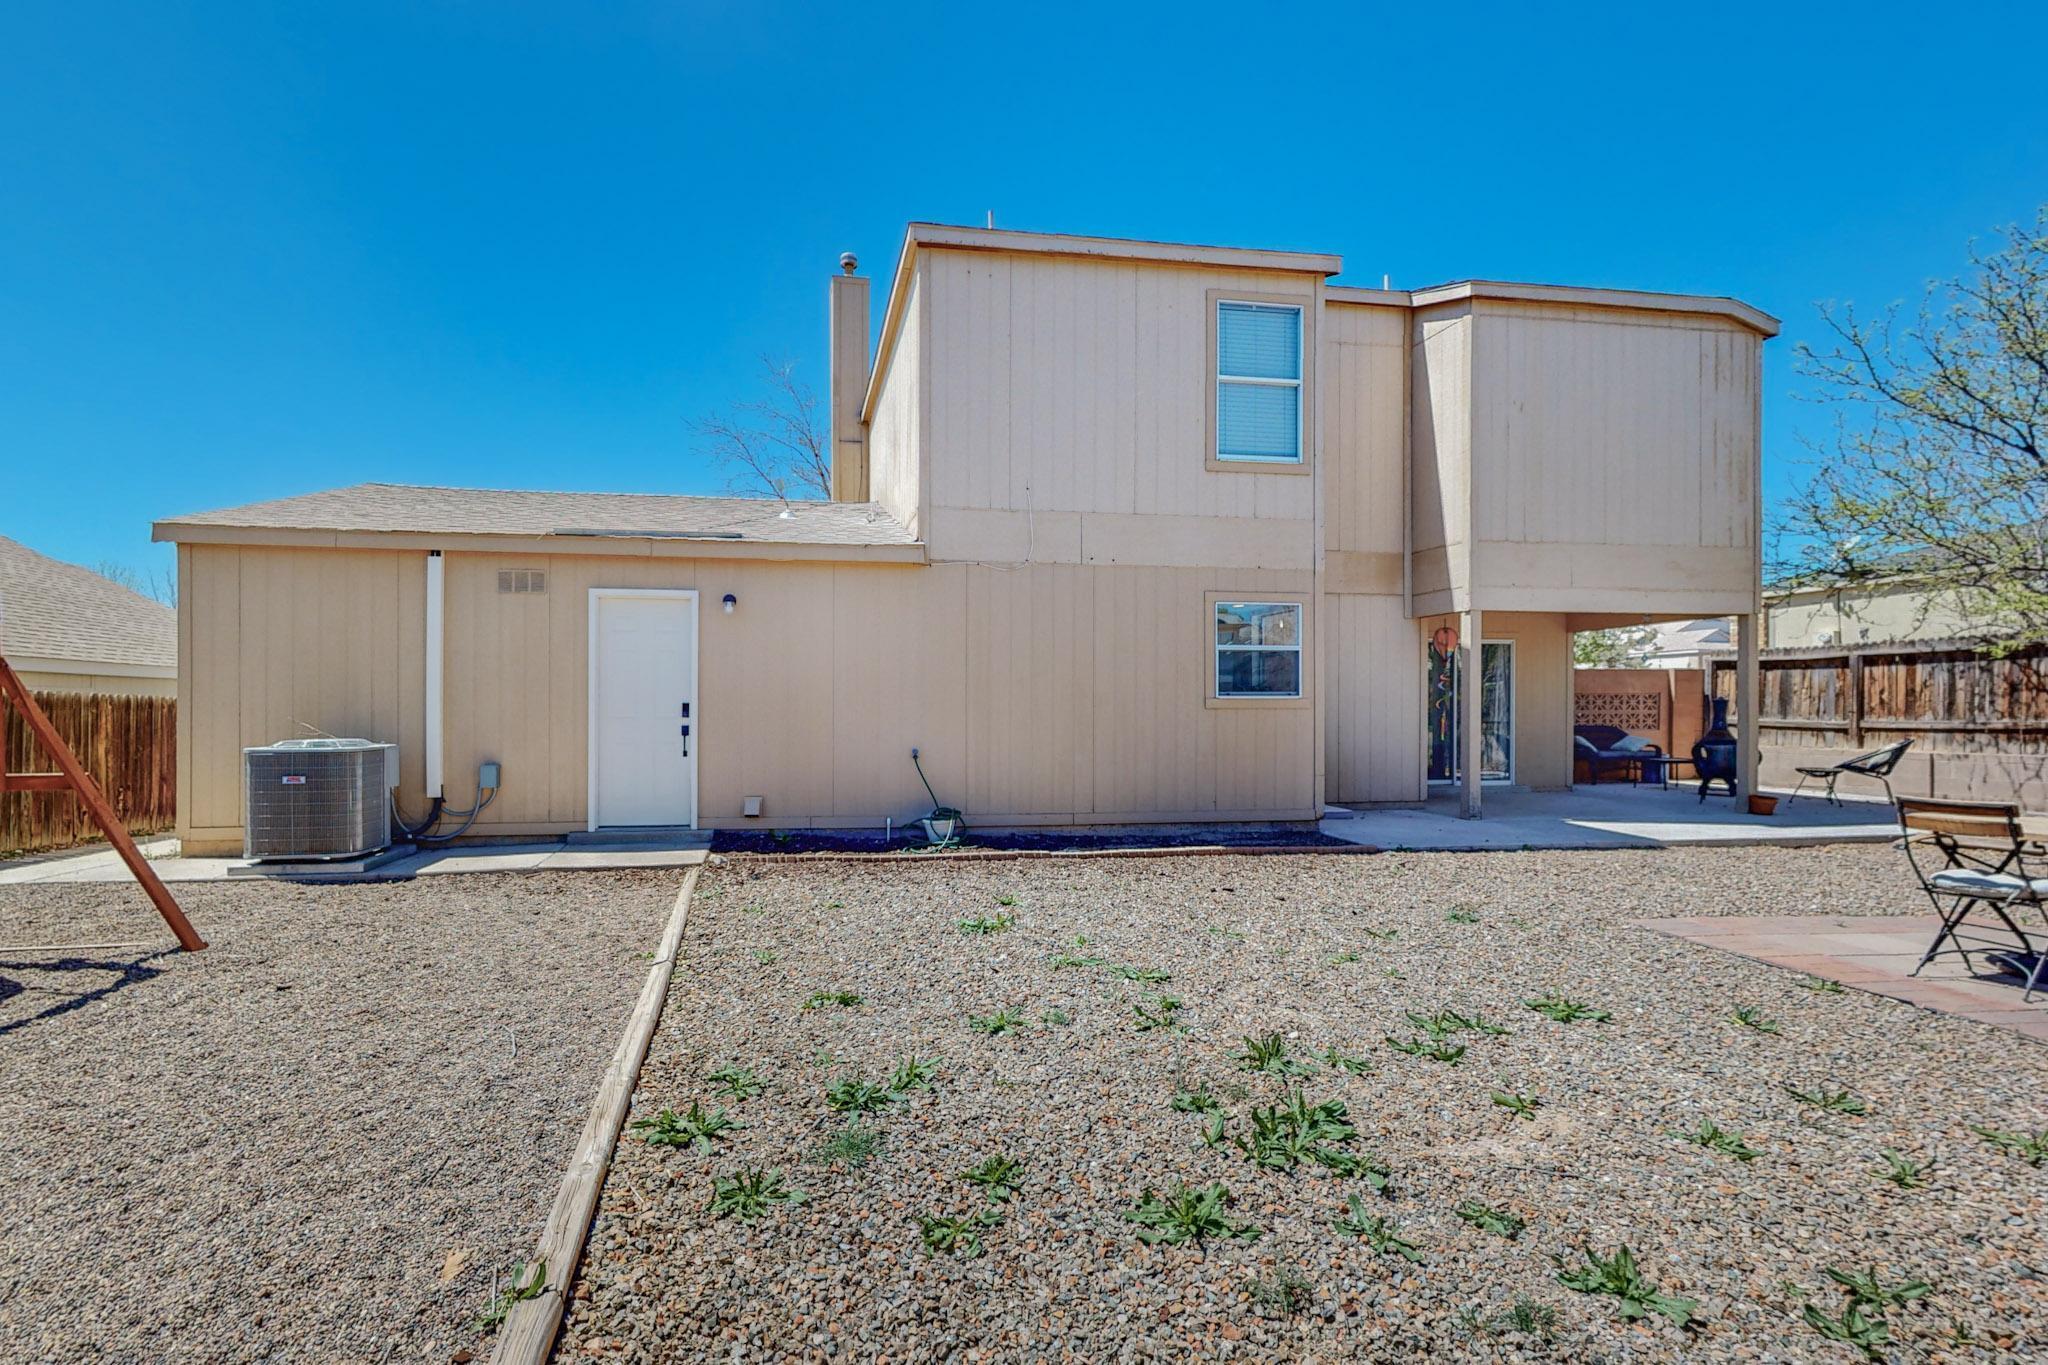 1752 Blueberry Drive NE, Rio Rancho, New Mexico 87144, 3 Bedrooms Bedrooms, ,3 BathroomsBathrooms,Residential,For Sale,1752 Blueberry Drive NE,1060963